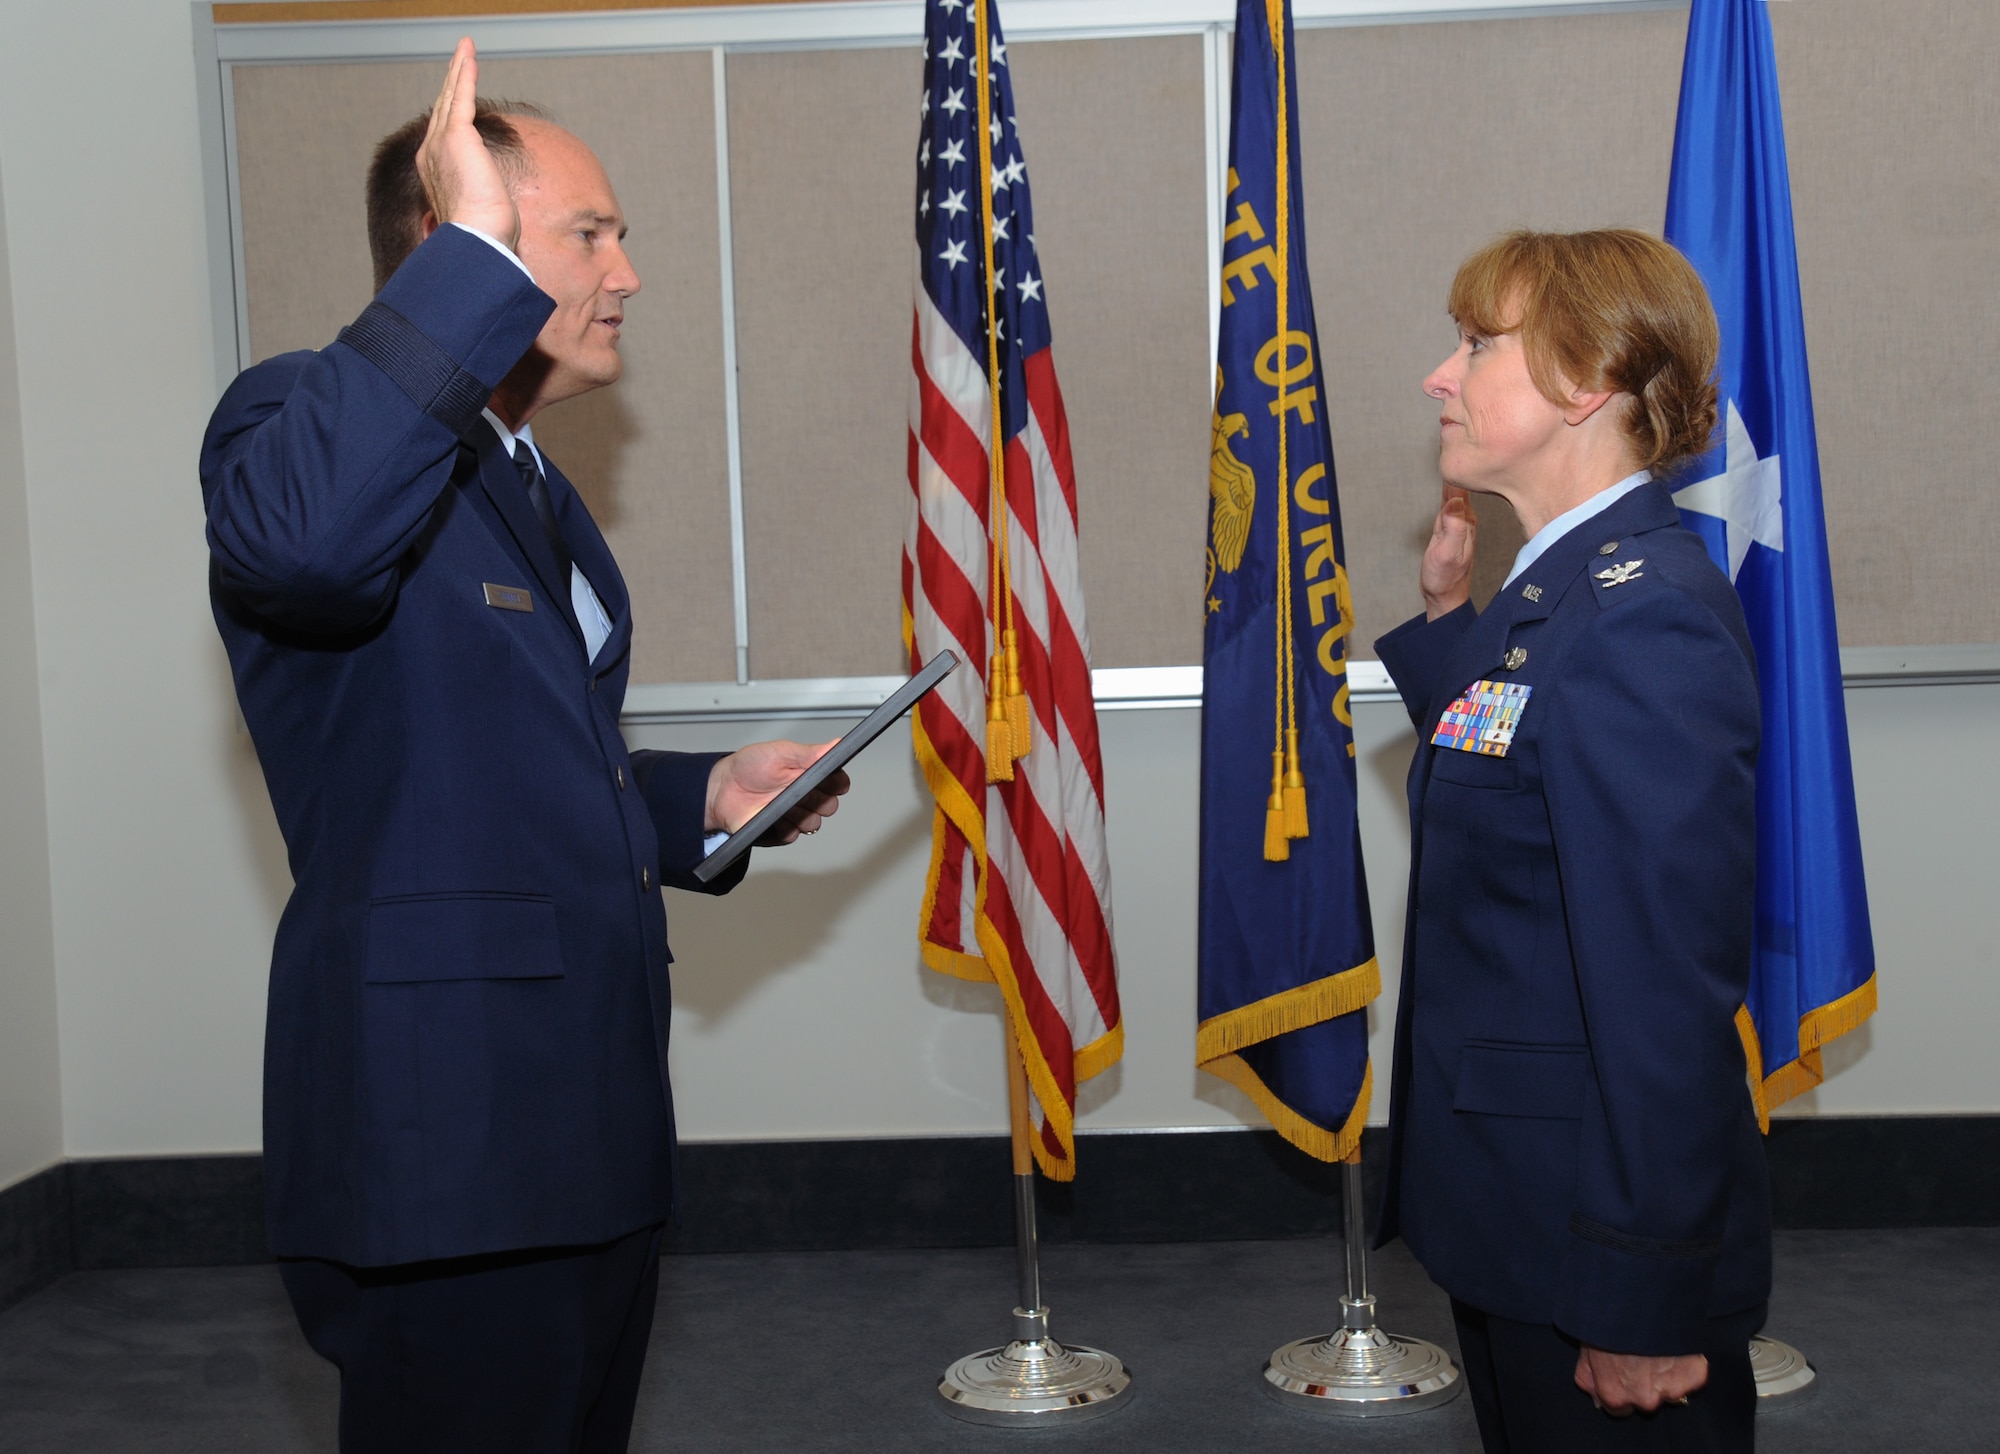 Brig. Gen. Michael Stencel, Commander of the Oregon Air National Guard, left, reaffirms the officer’s oath to newly promoted Col. Donna Prigmore during her promotion ceremony held at the Portland Air National Guard Base, Ore., Aug. 3, 2014. (U.S. Air National Guard photo by Tech. Sgt. John Hughel, 142nd Fighter Wing Public Affairs/Released)